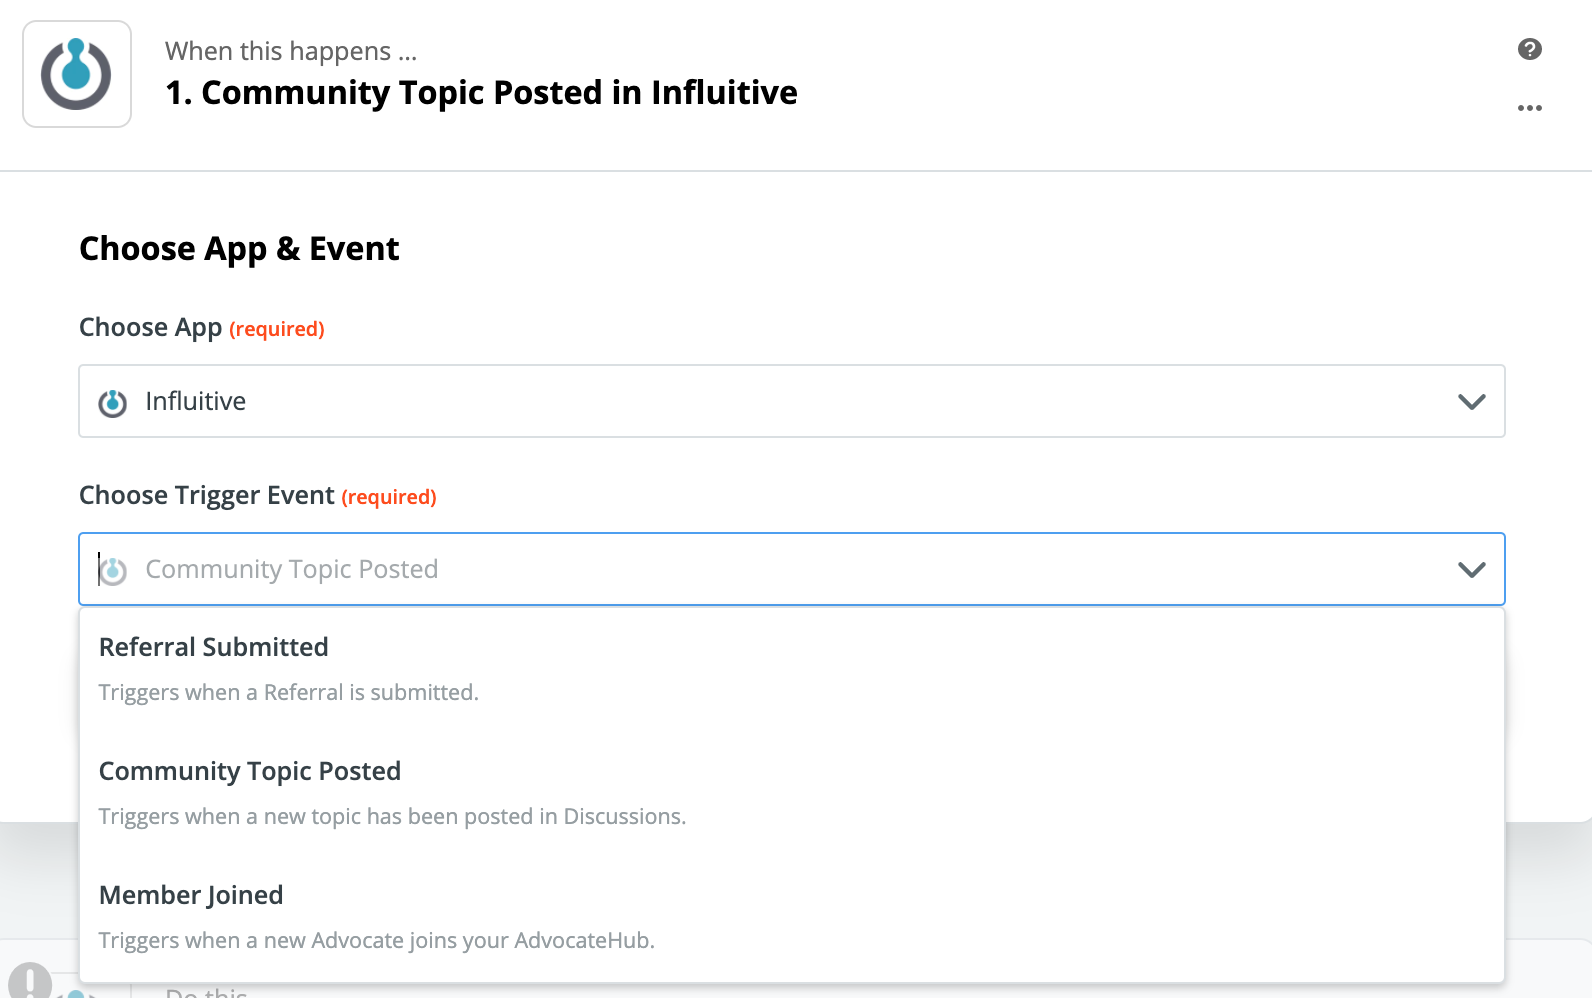 Example of a an event you can choose for the Influitive app in Zapier